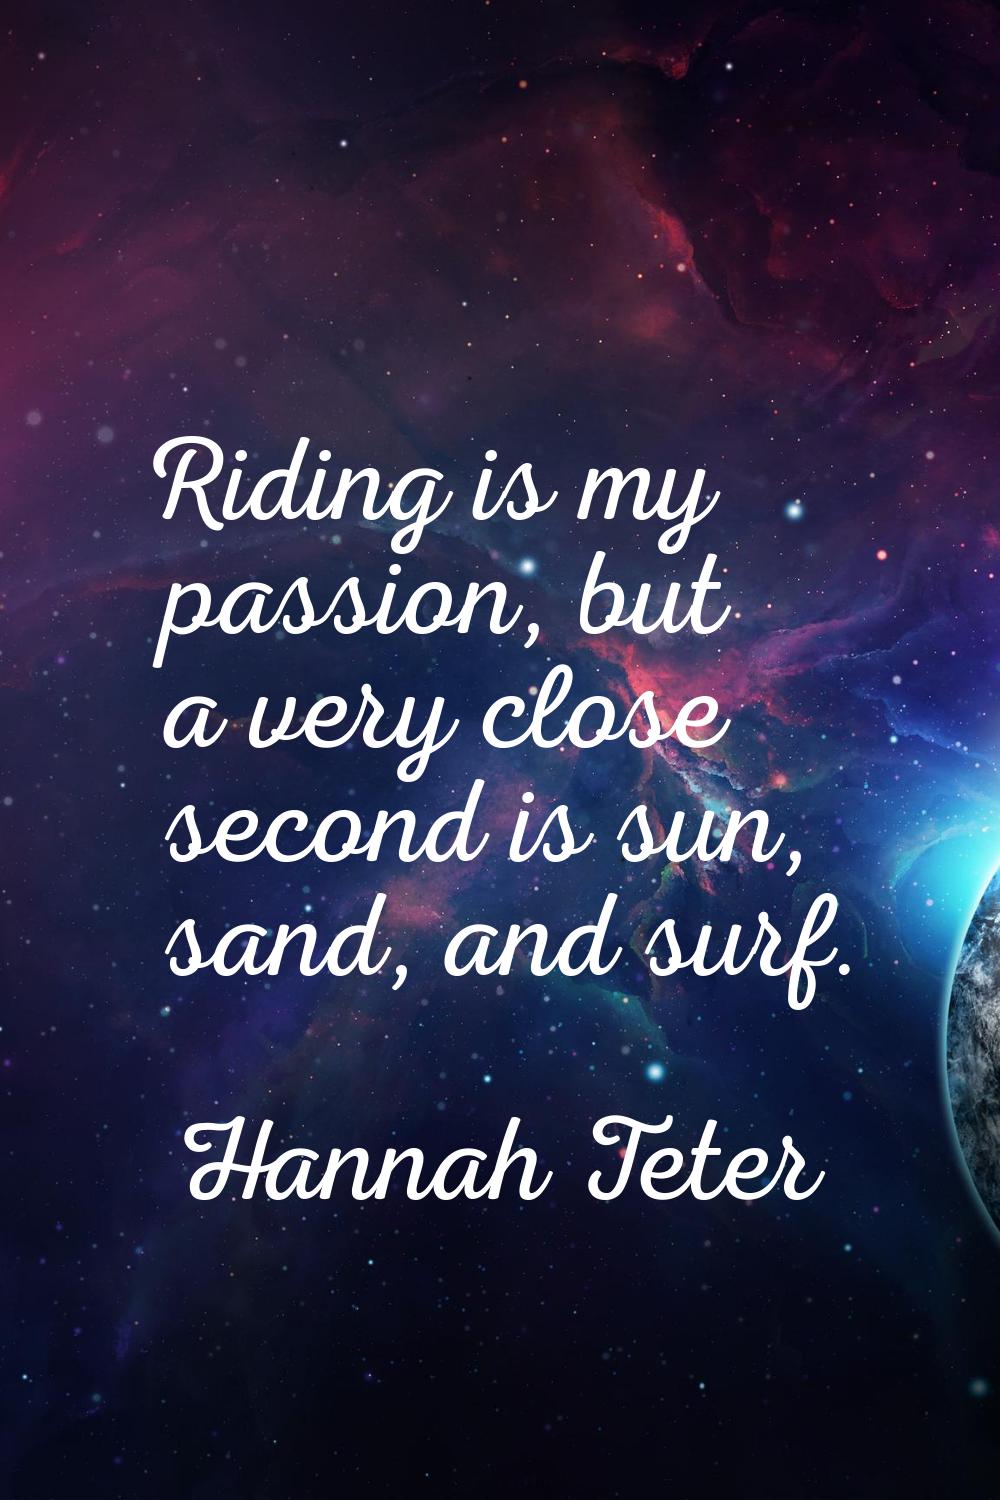 Riding is my passion, but a very close second is sun, sand, and surf.